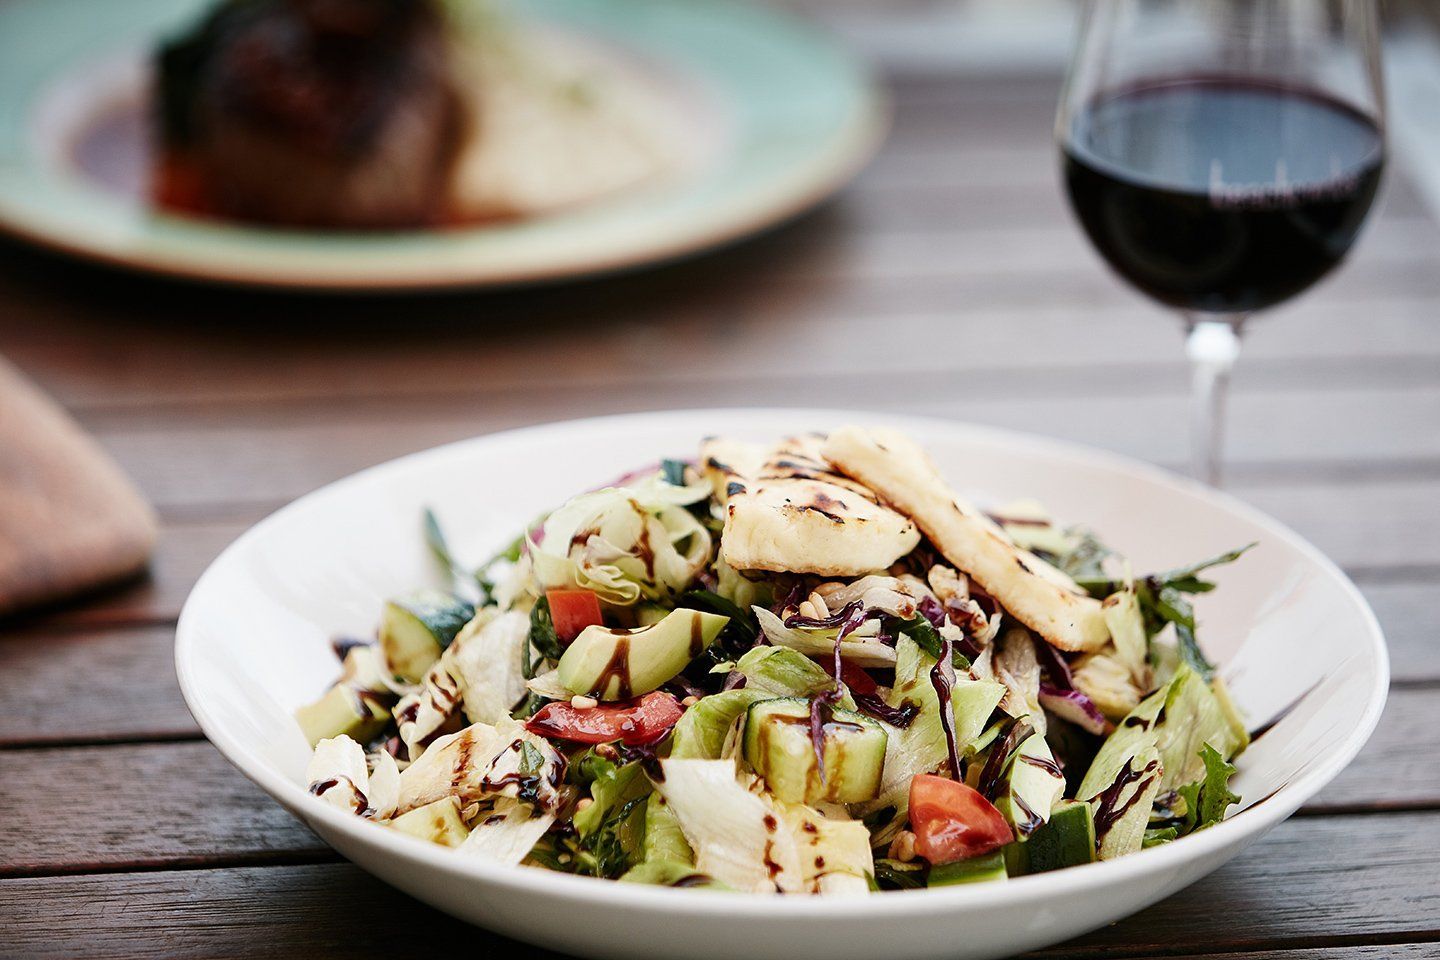 A bowl of salad is on a wooden table next to a glass of wine.